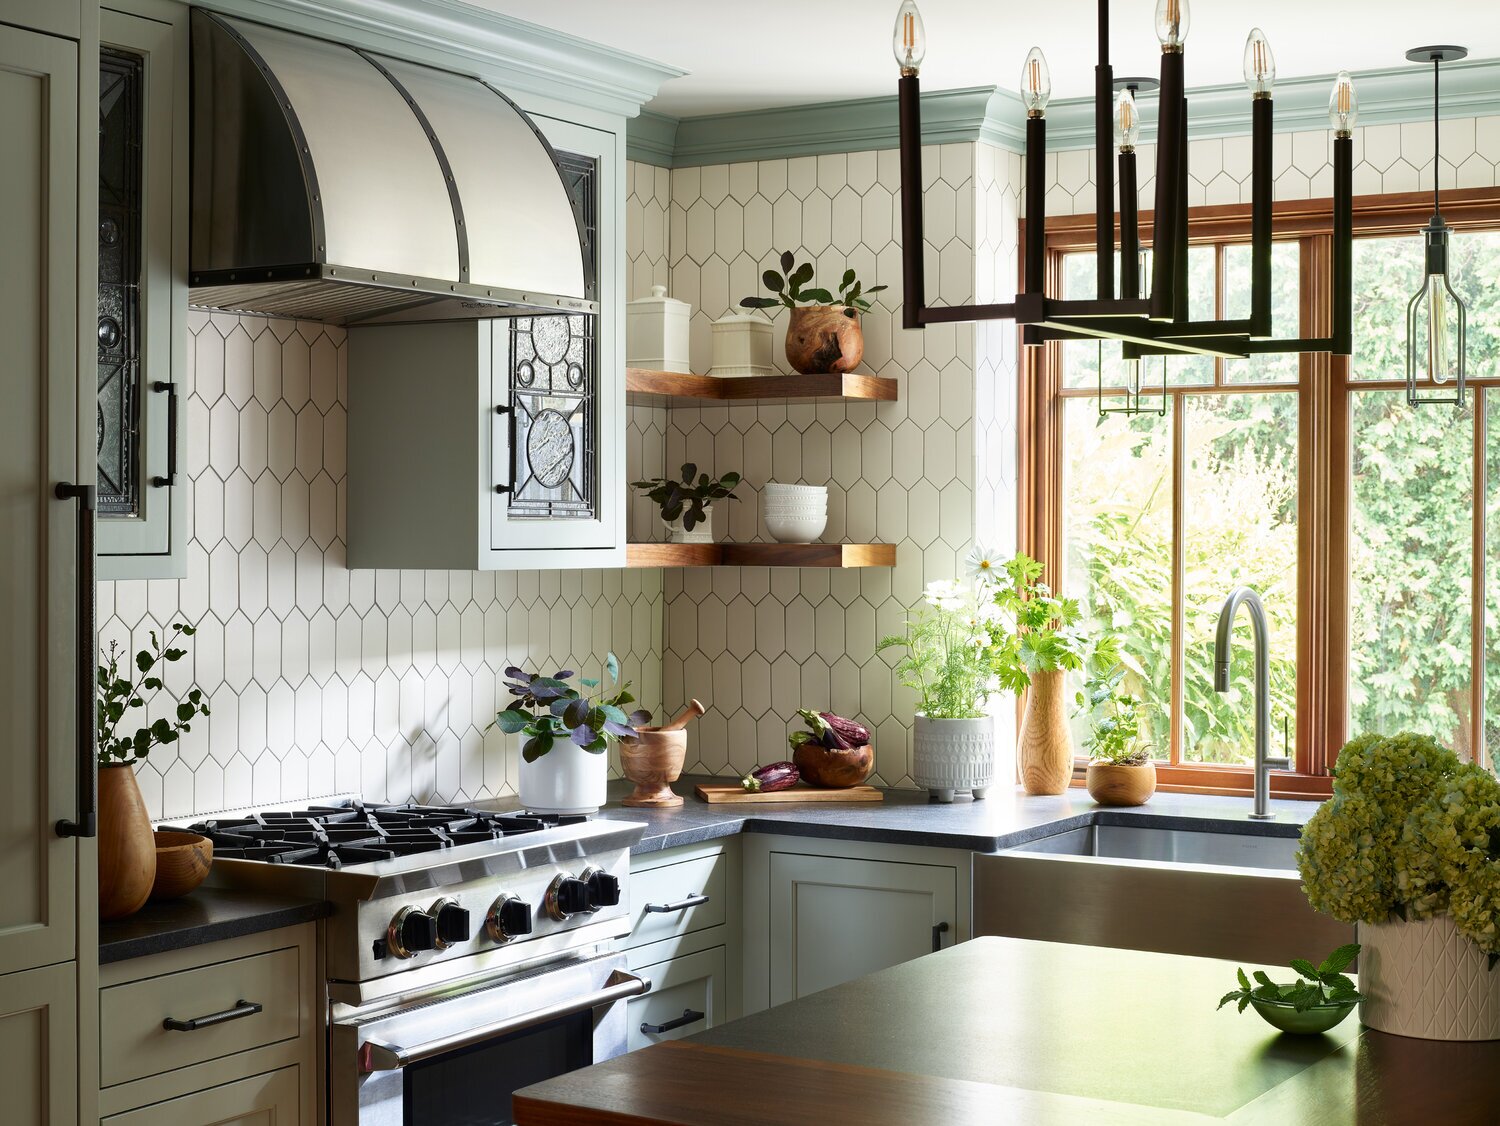 Manchester-based interior designer Karen Swanson designed the counter in this Boston kitchen to extend eight inches behind the sink to accommodate plenty of potted plants.